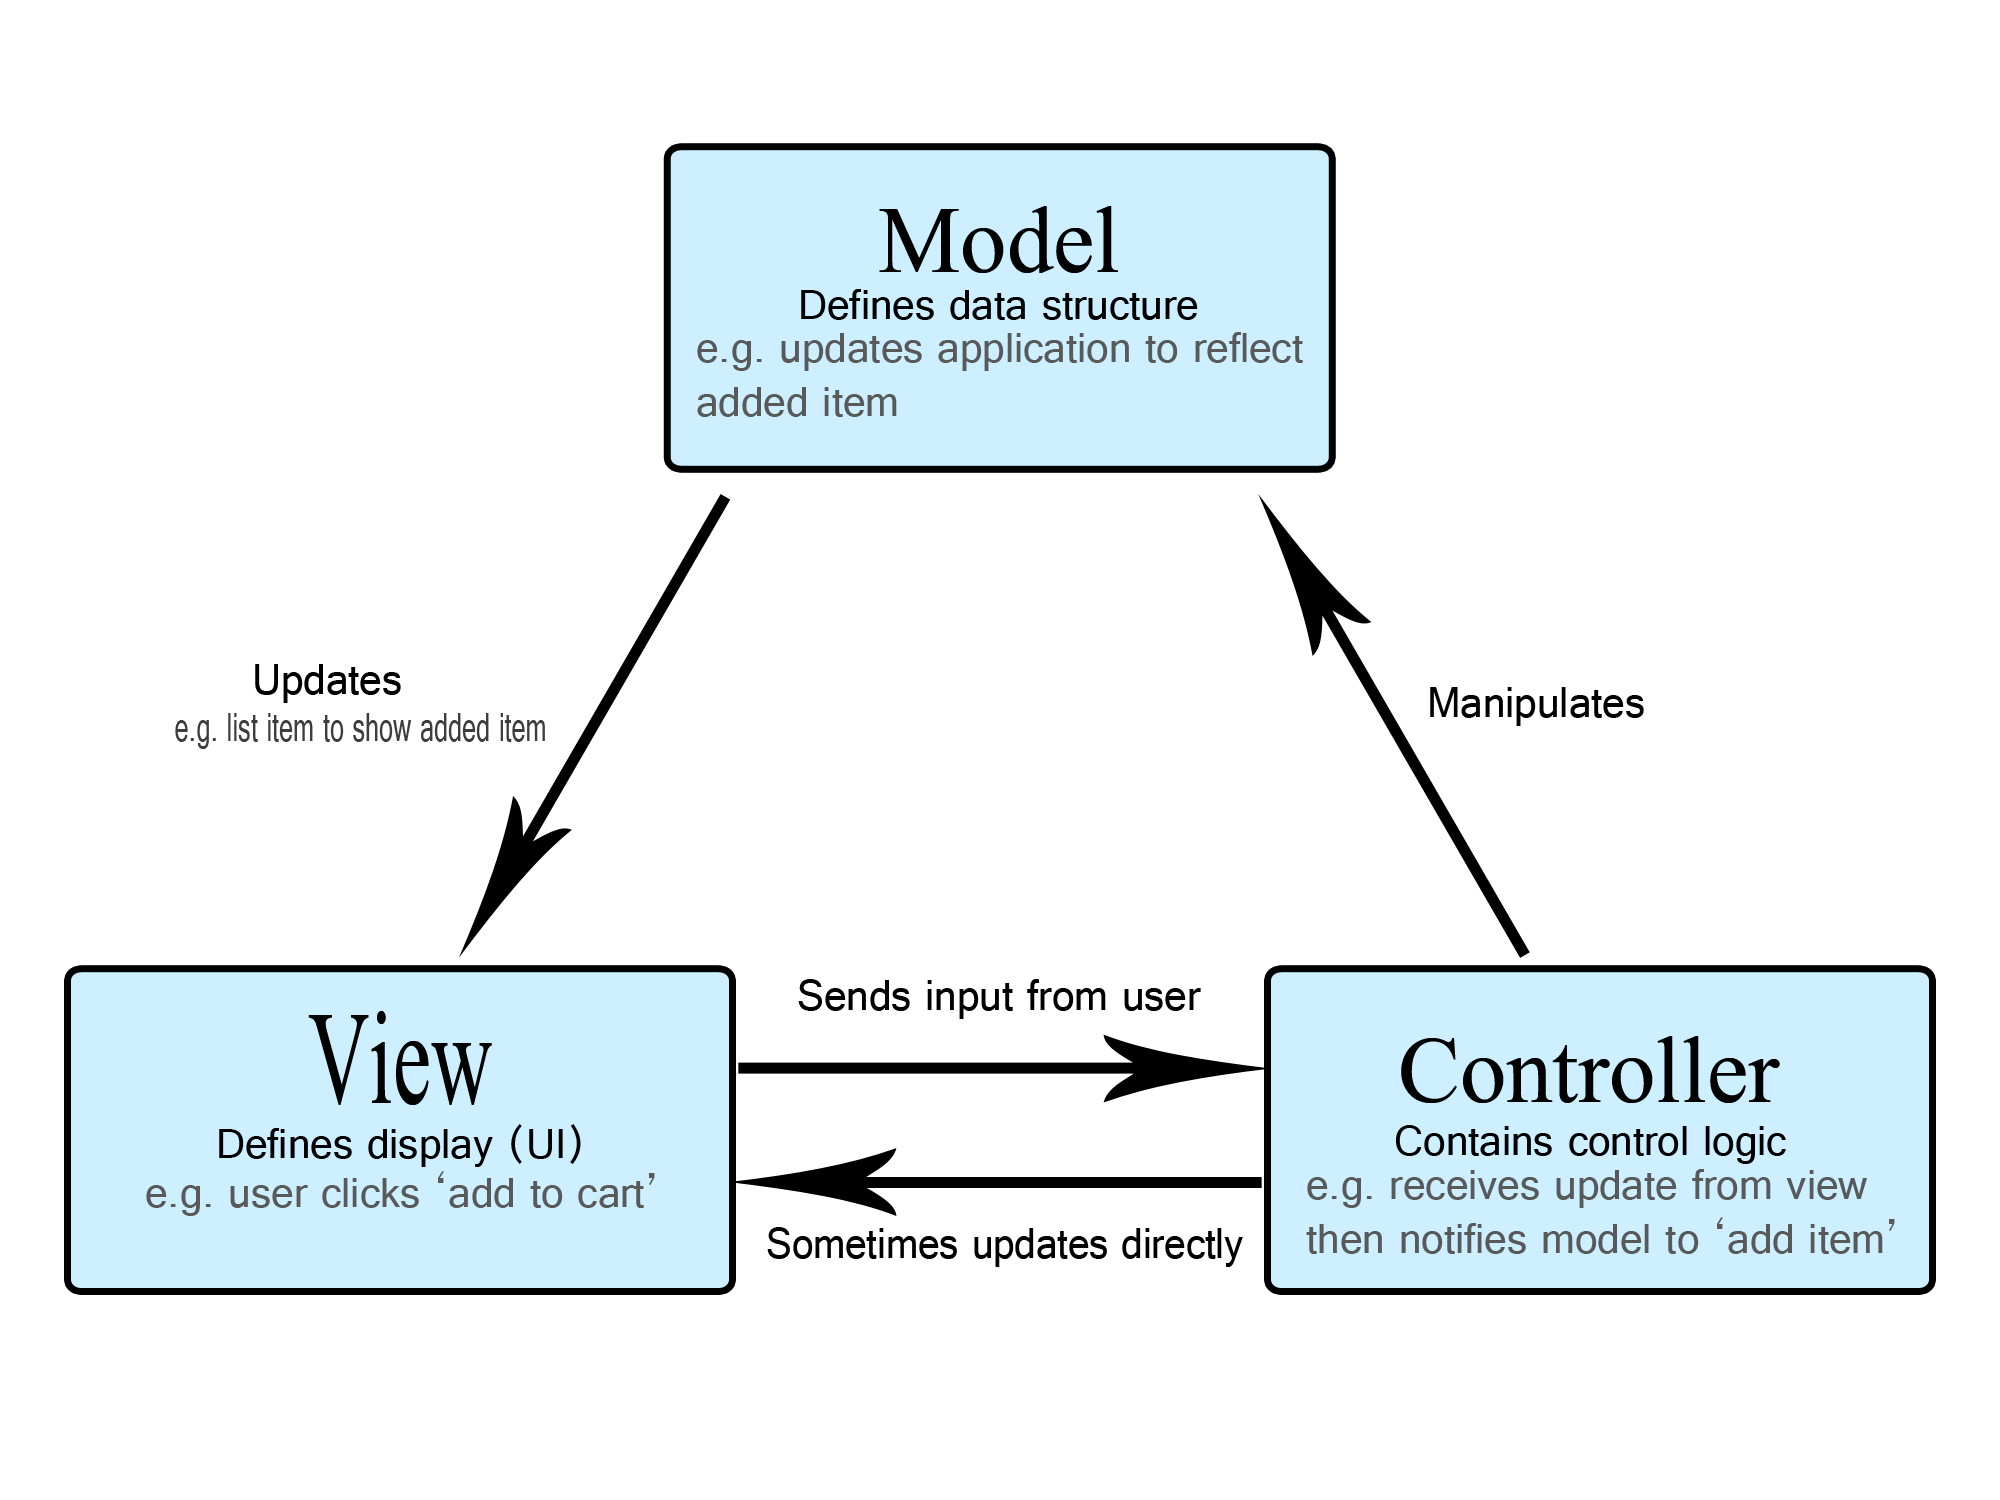 View

Defines display (Ul)
e.g. user clicks ‘add to cart’

 

Model

Defines data structure
e.g. updates application to reflect

added item

 

Controller

Contains control logic
e.g. receives update from view

then notifies model to ‘add item’